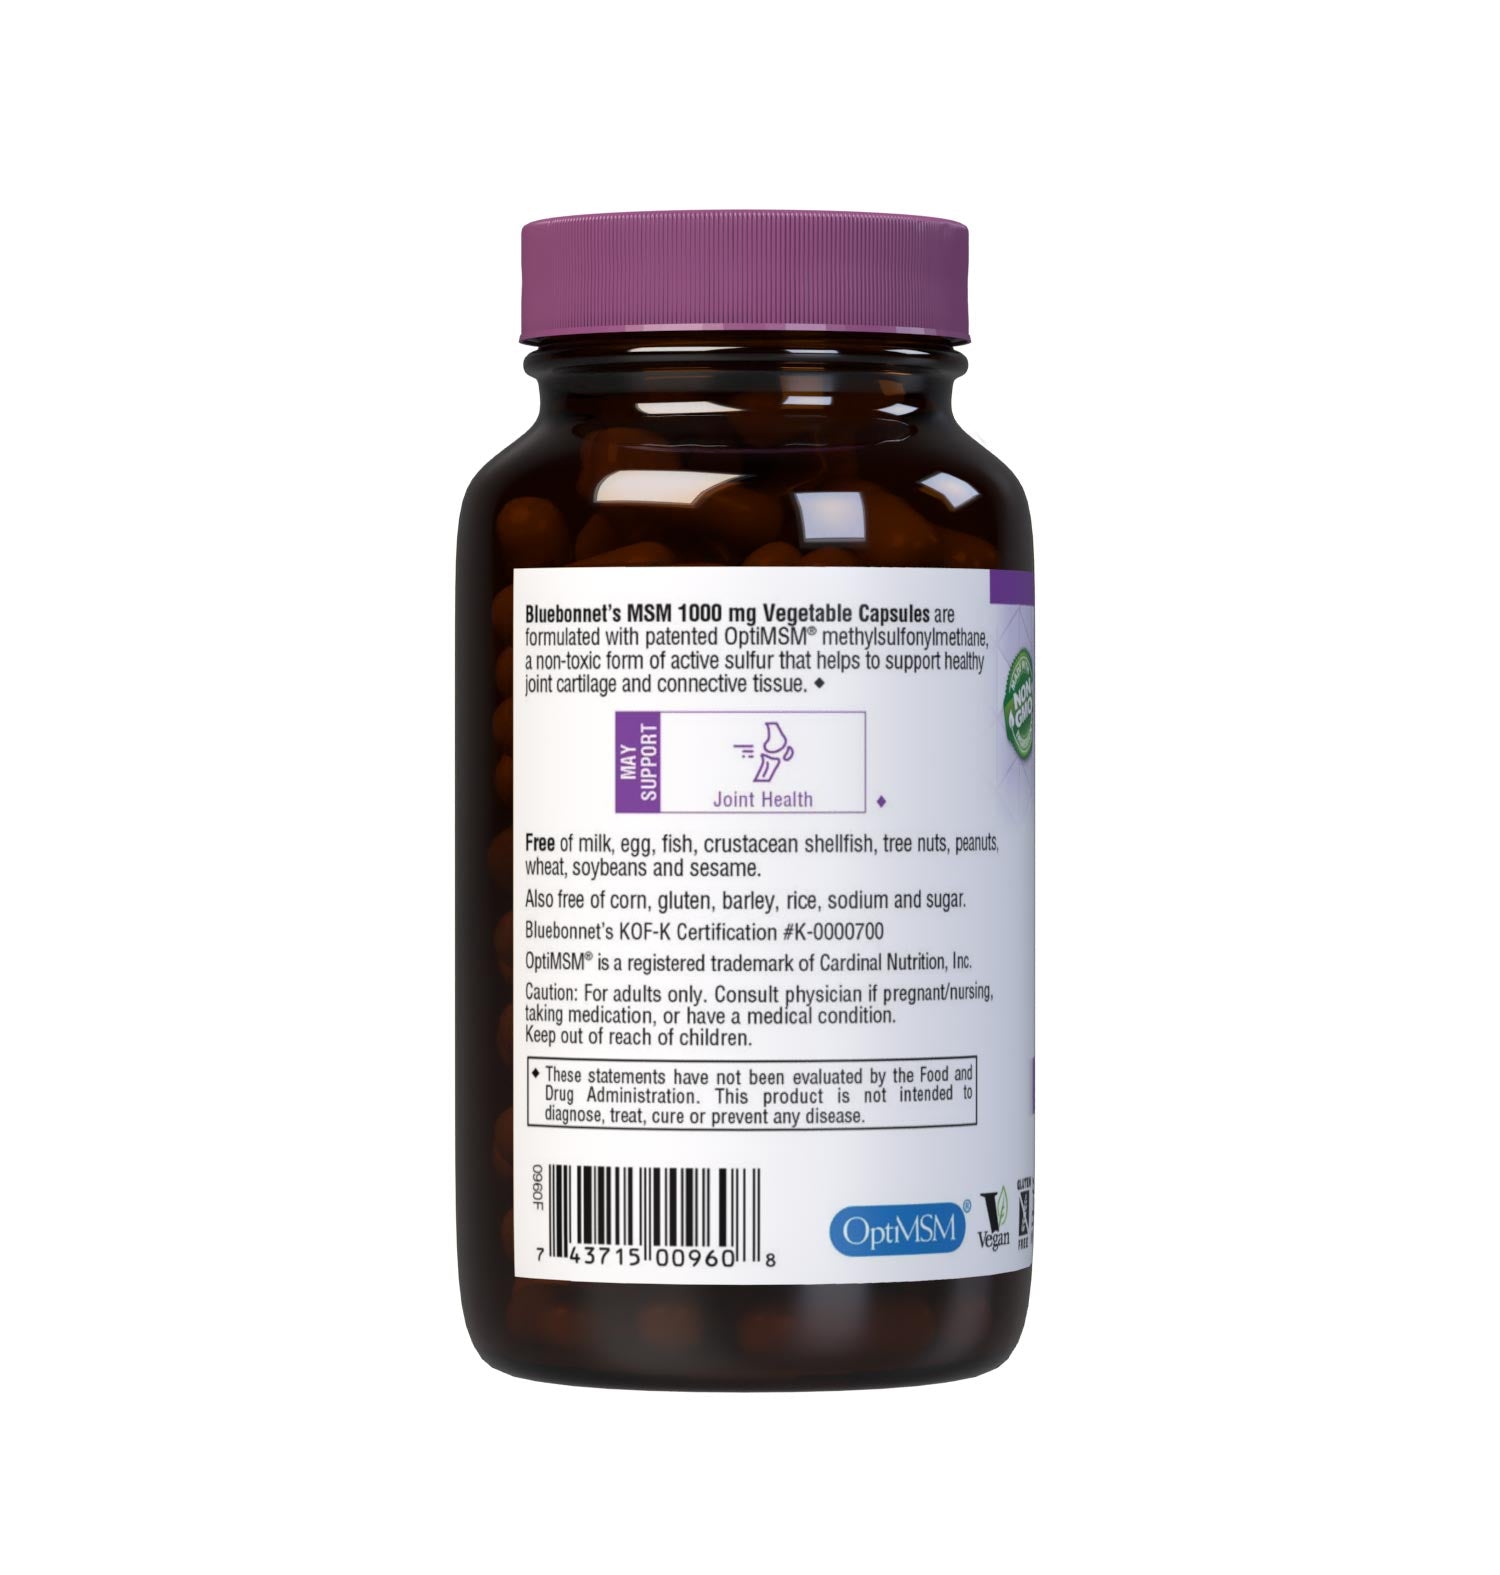 Bluebonnet’s MSM 1000 mg 120 Vegetable Capsules are formulated with patented OptiMSM methylsulfonylmethane, a non-toxic form of active sulfur that is tested in our own state-of-the-art laboratory for purity and potency. MSM helps support healthy joint cartilage and connective tissue. Description panel. #size_120 count